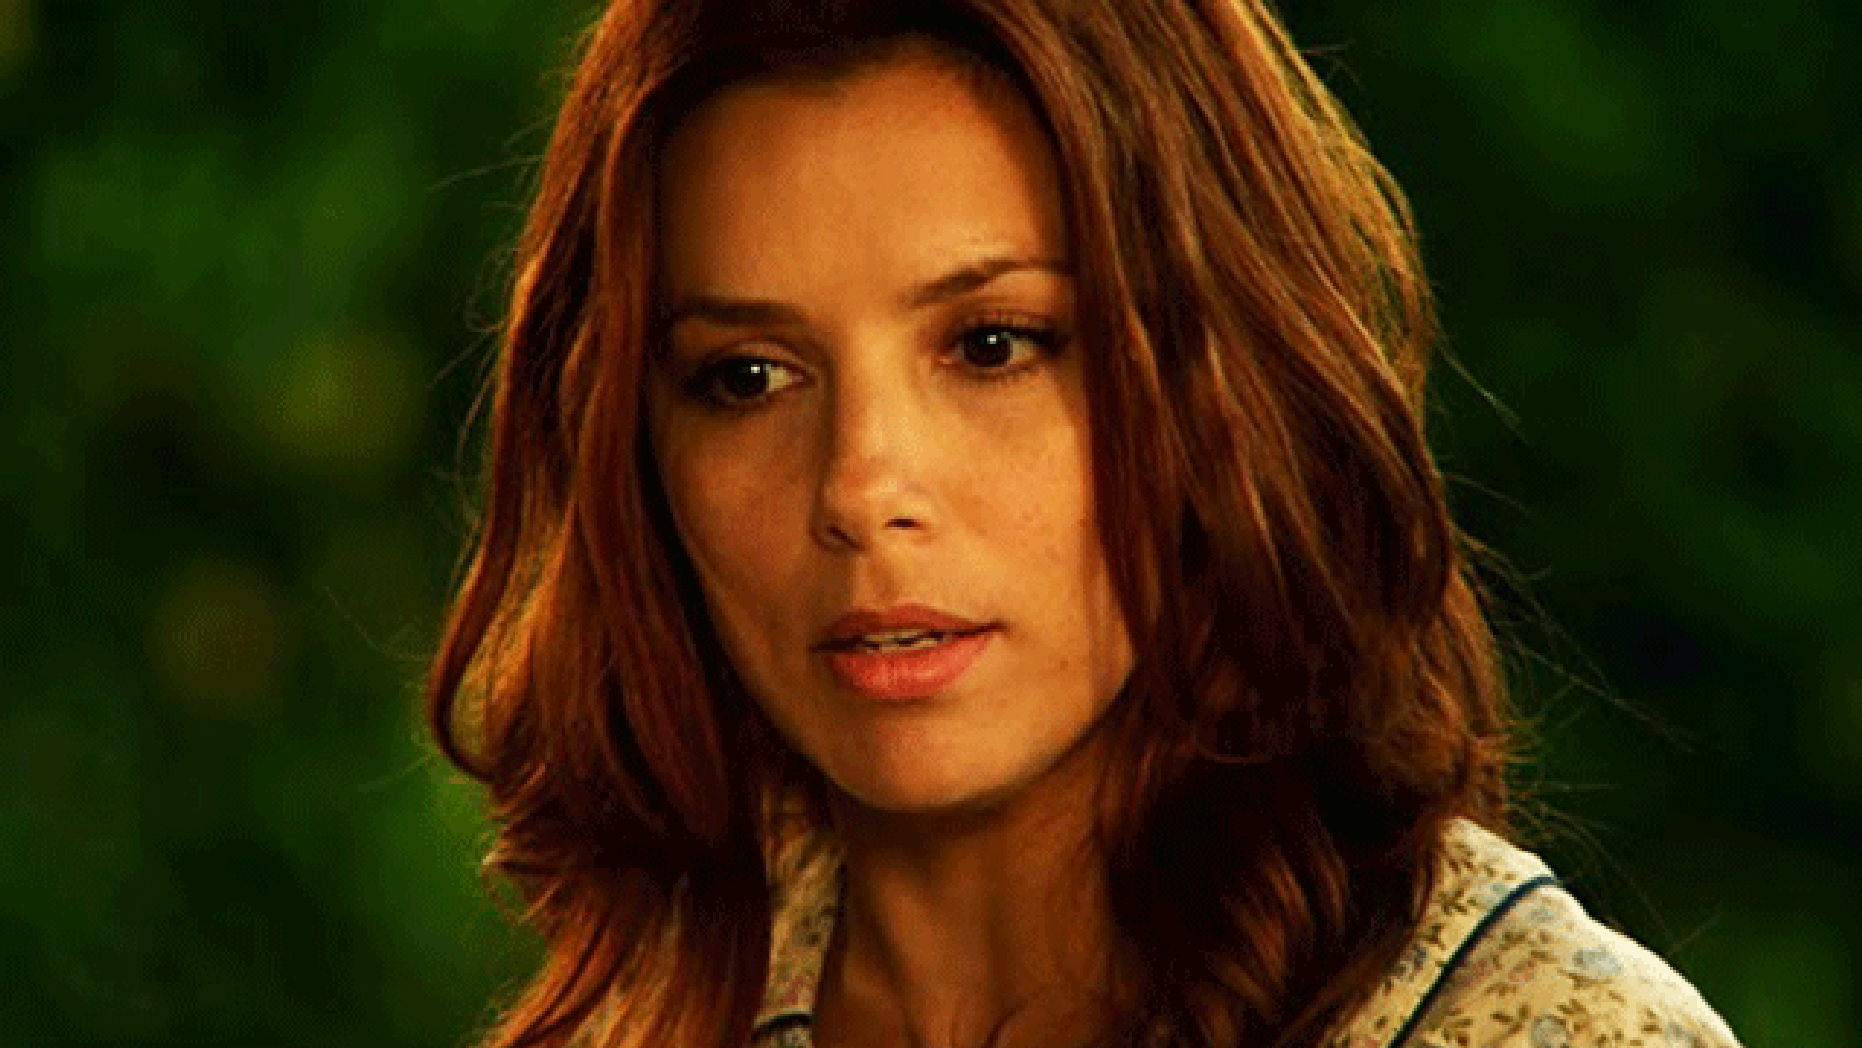 Exclusive Eva Longoria Plays Lesbian Town Mayor In New Comedy Without Men Fox News 